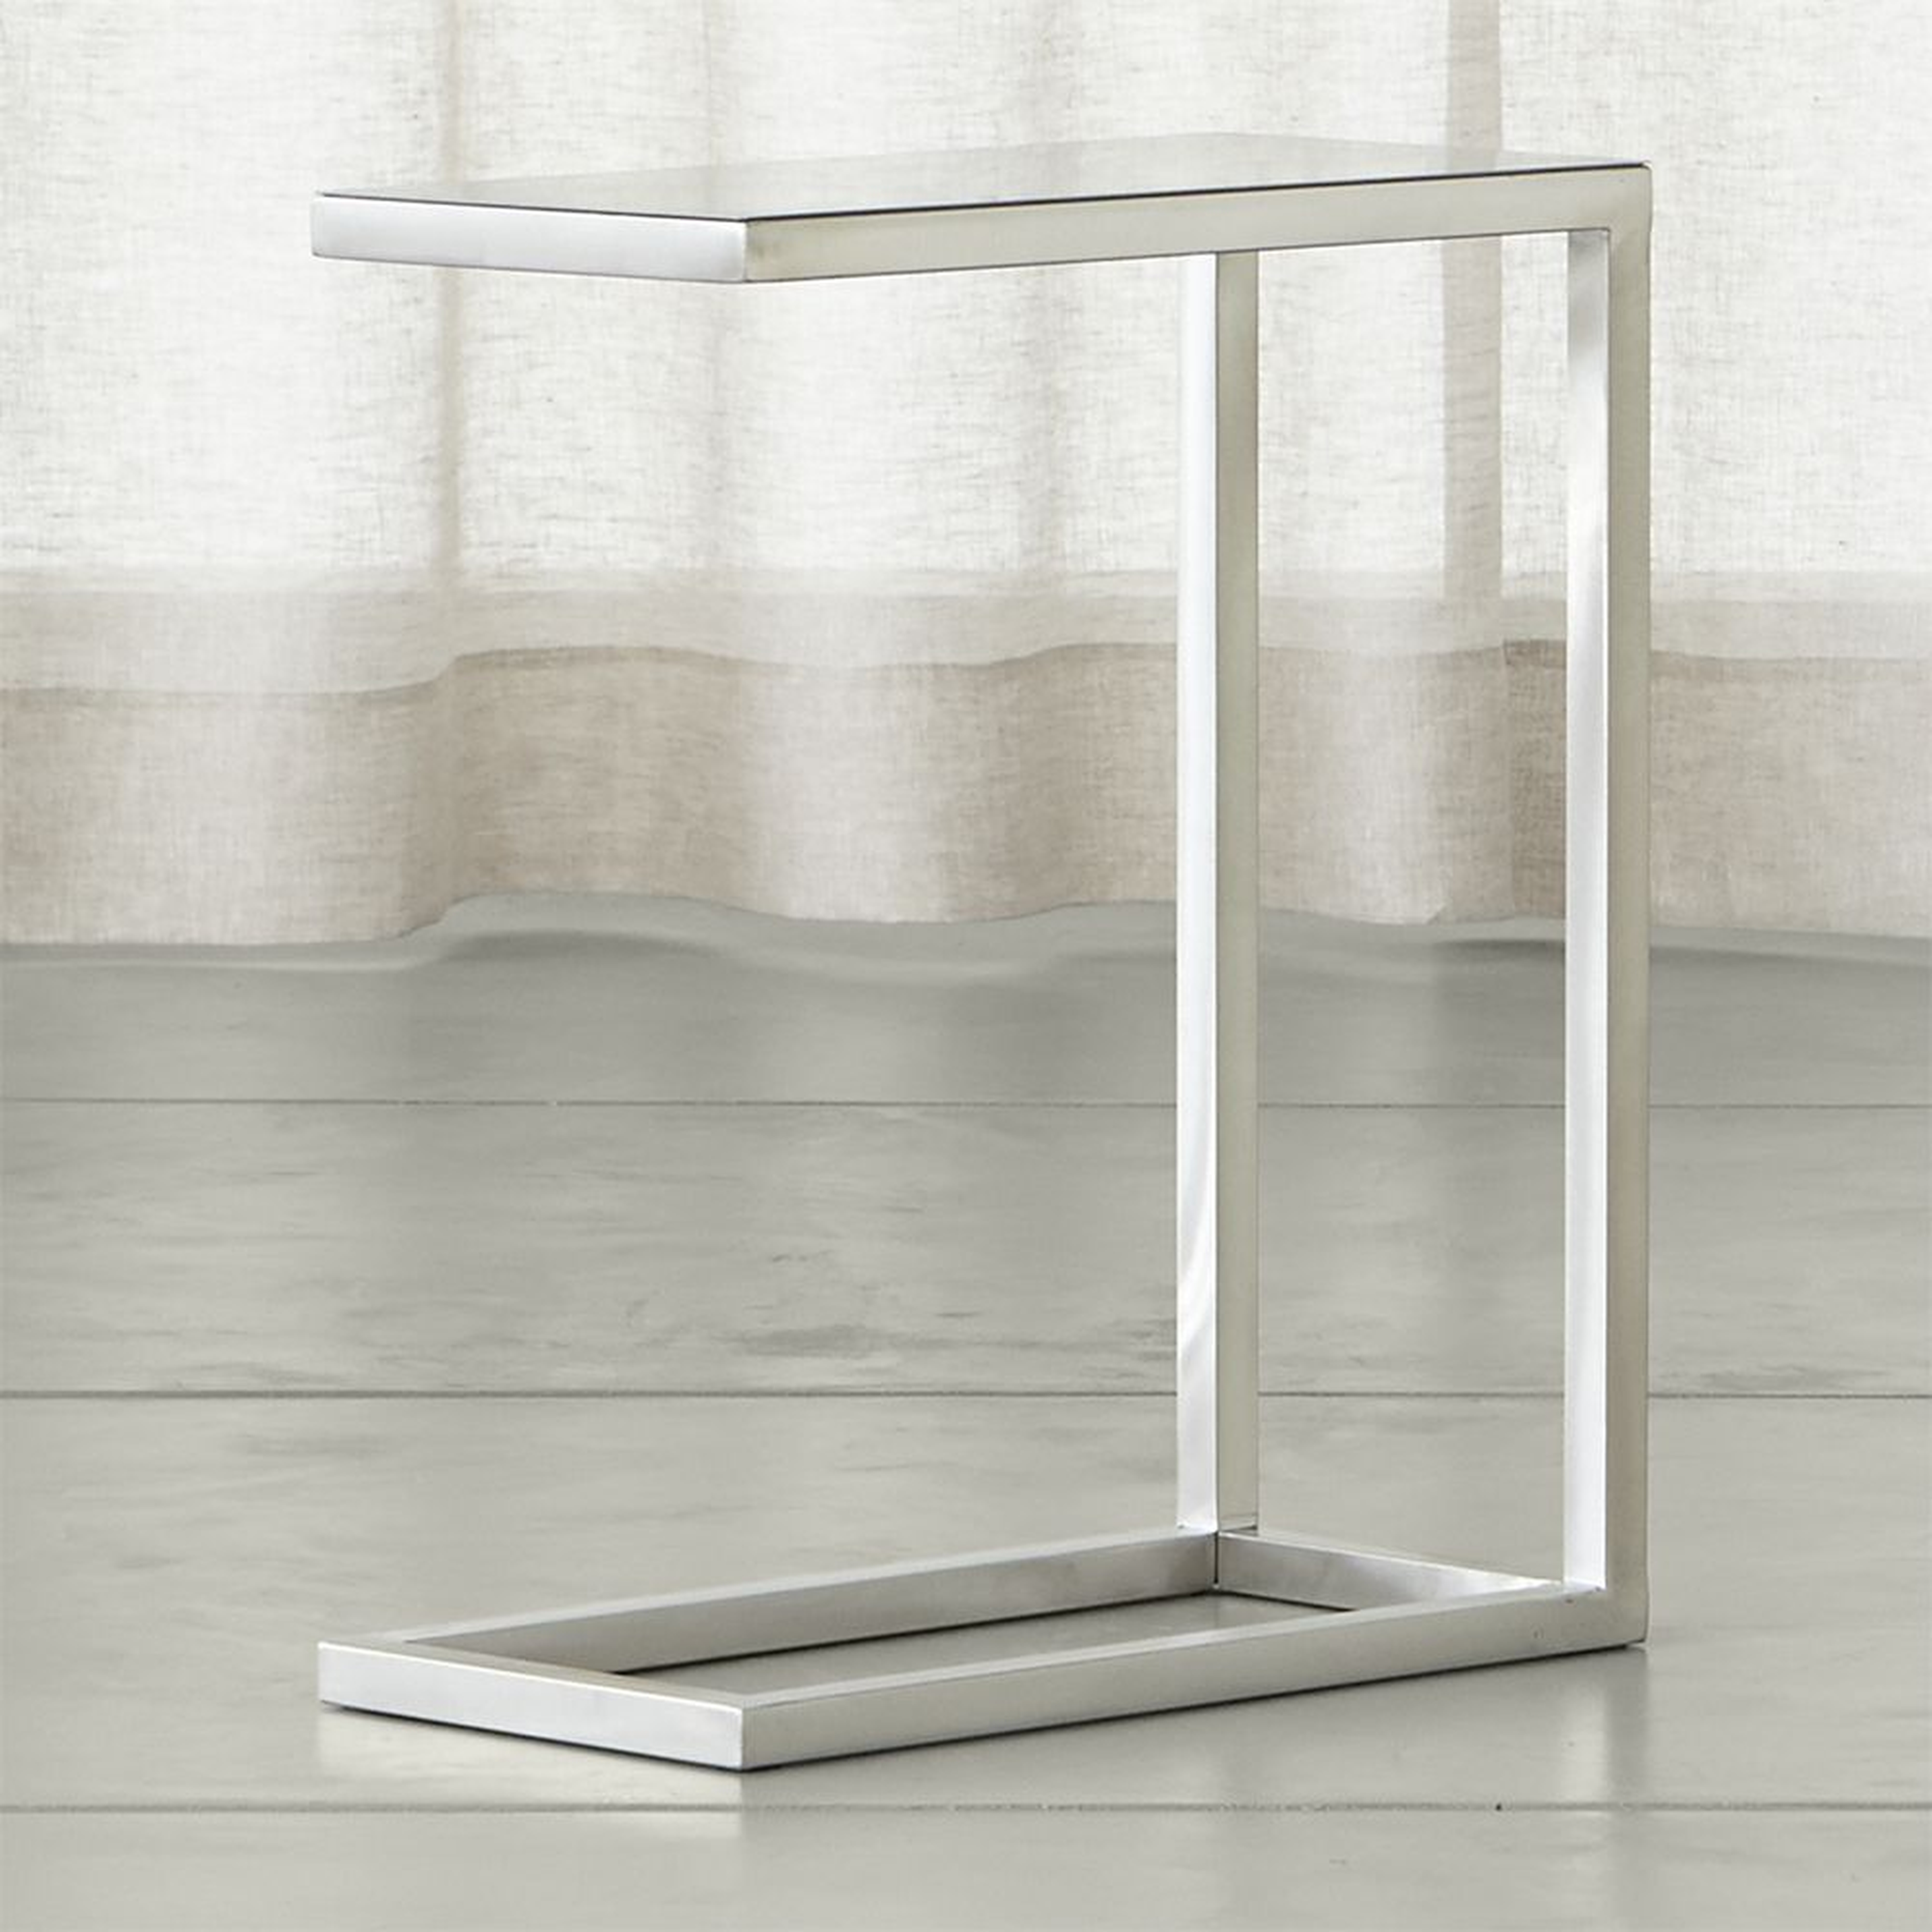 Era Stainless Steel C Table - Crate and Barrel